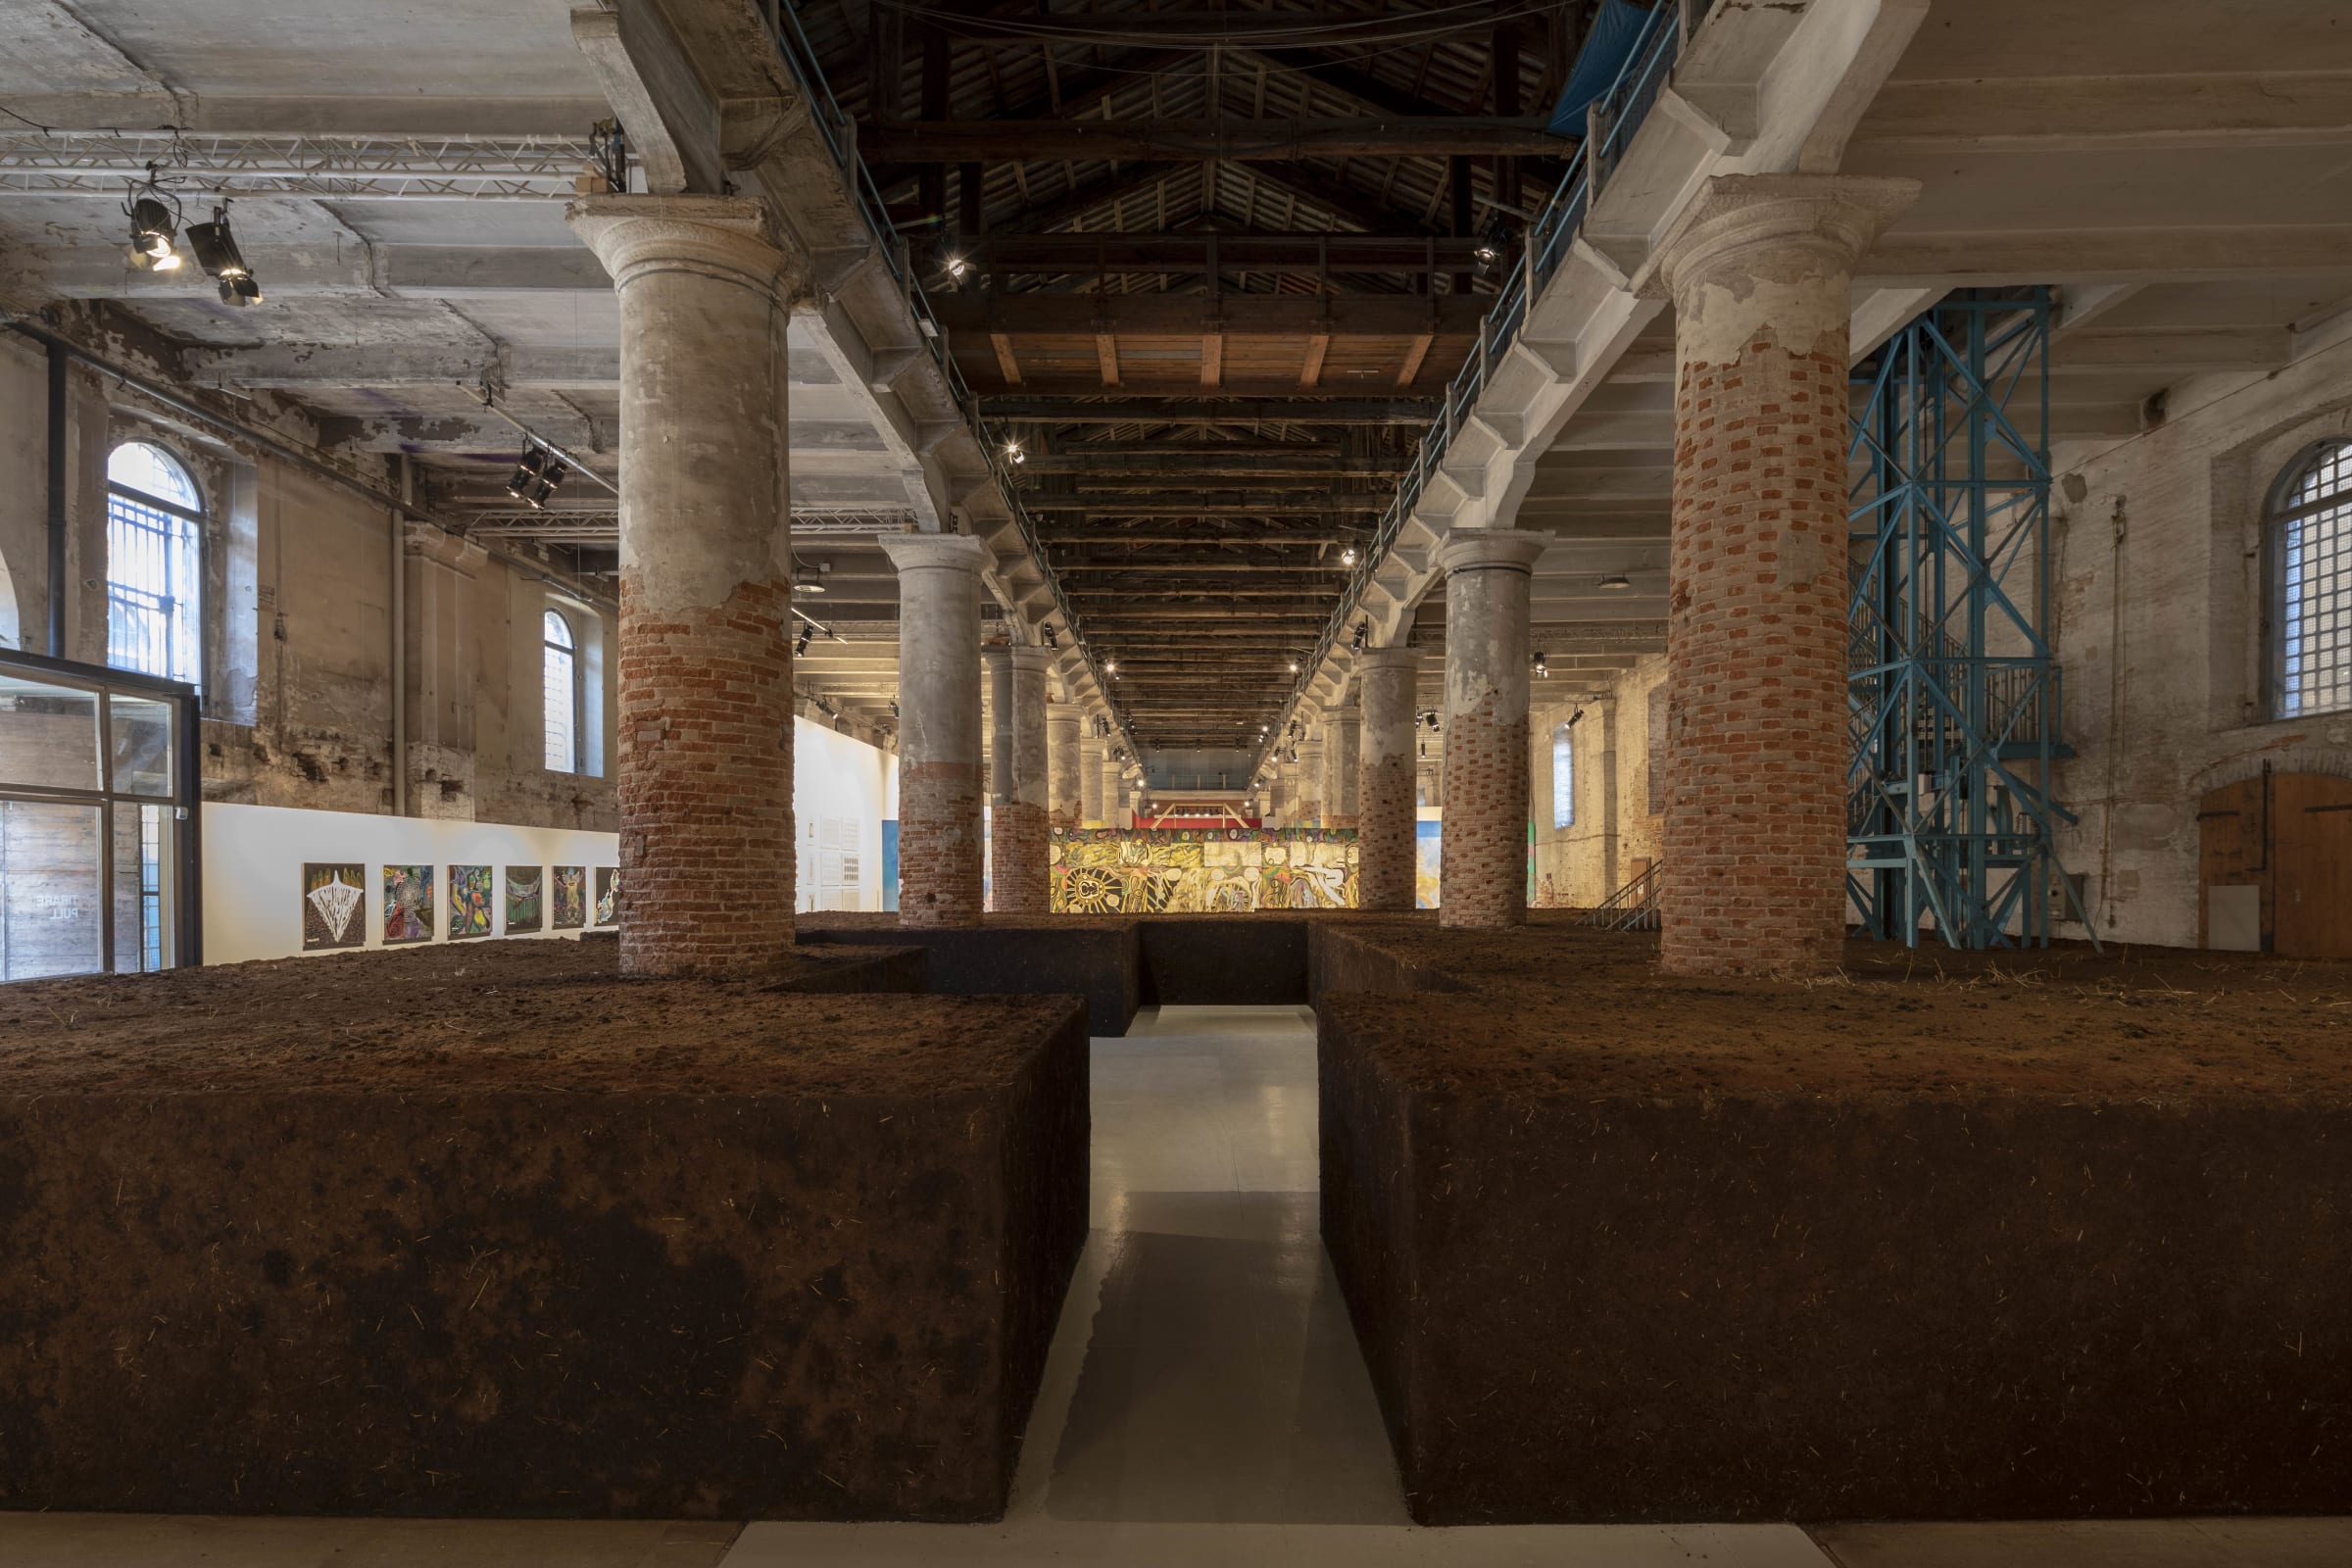 An installation by Delcy Morales at the 2022 Venice Biennale made of earth